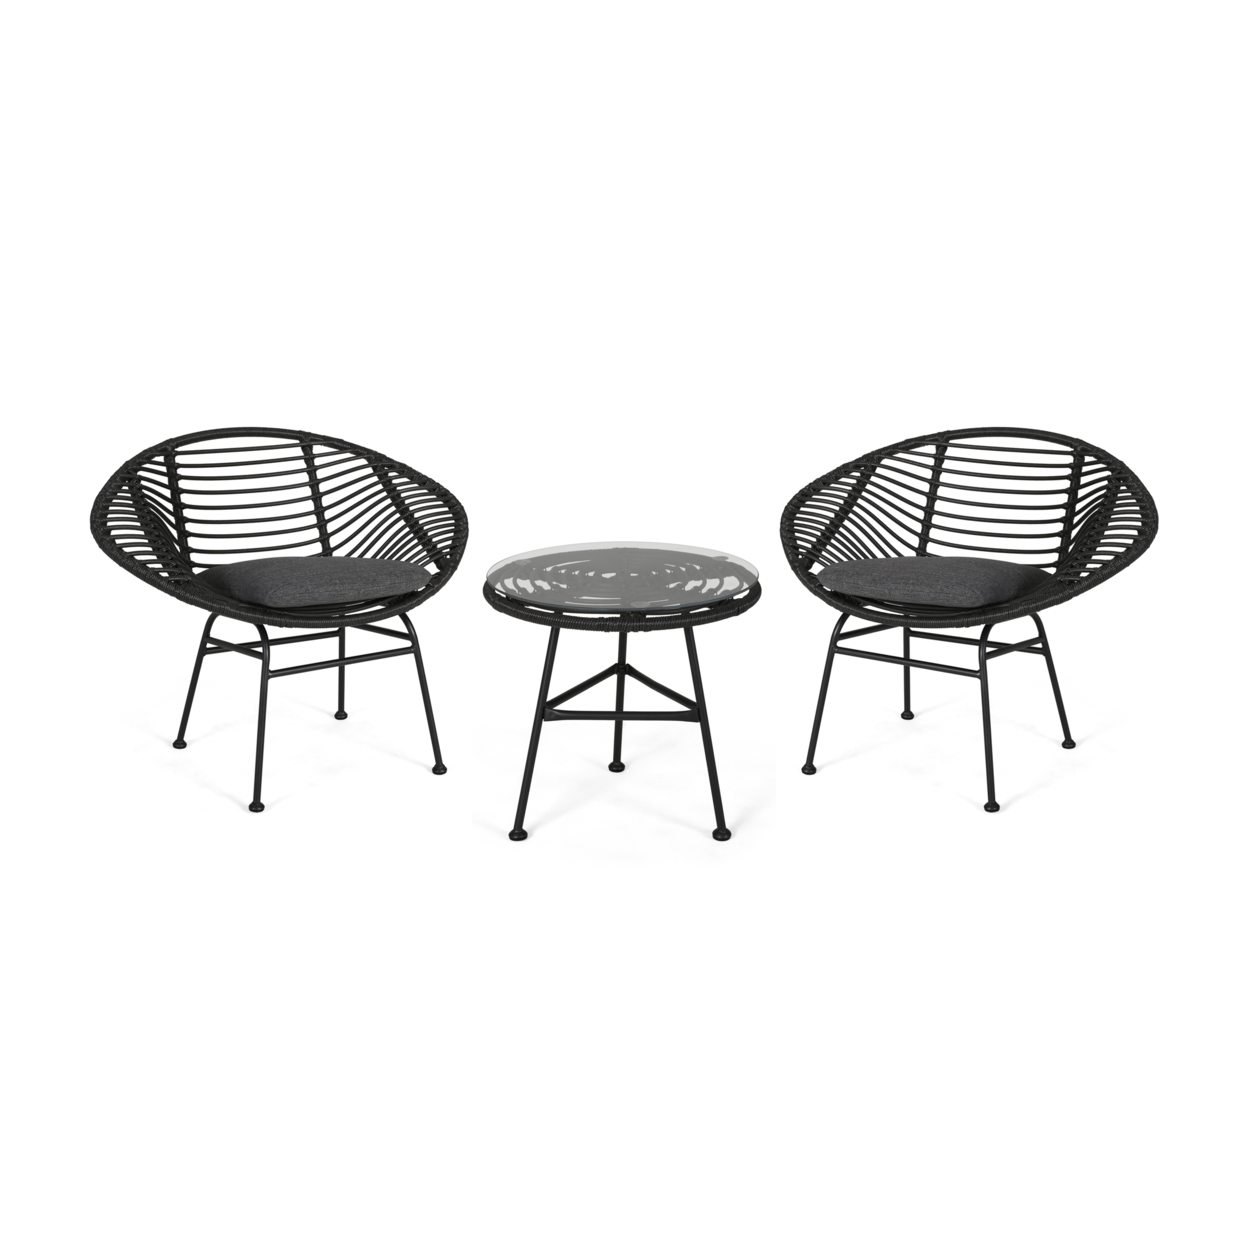 Isabel Outdoor Faux Wicker 2 Seater Chat Set With Tempered Glass Table - Gray, Dark Gray, Black